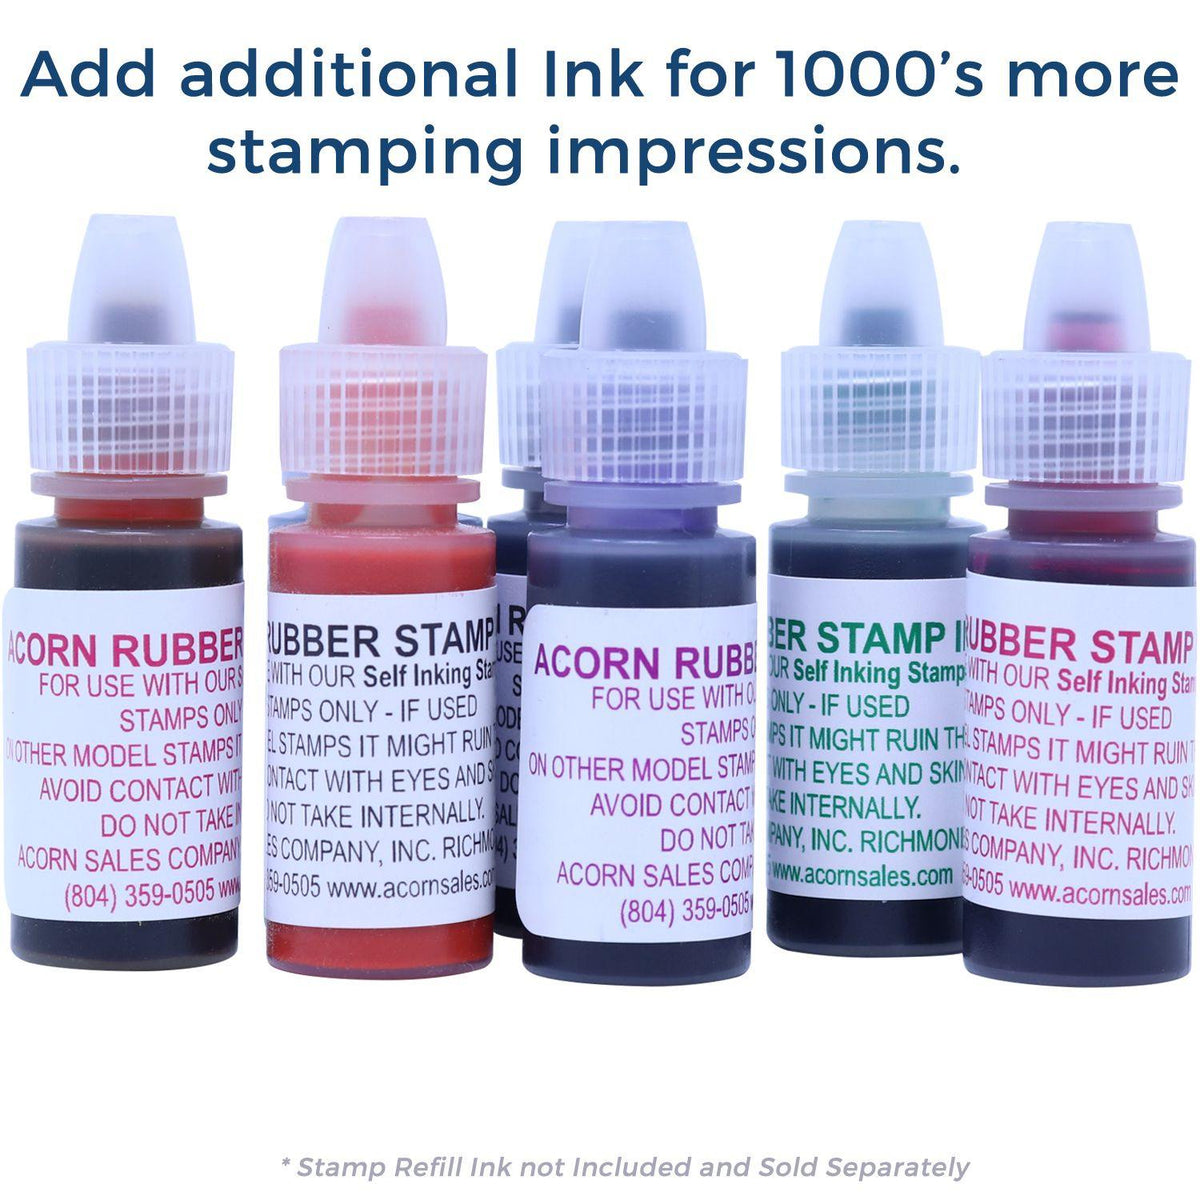 Refill Inks for Large Pre-Inked Non-Smoker Stamp Available